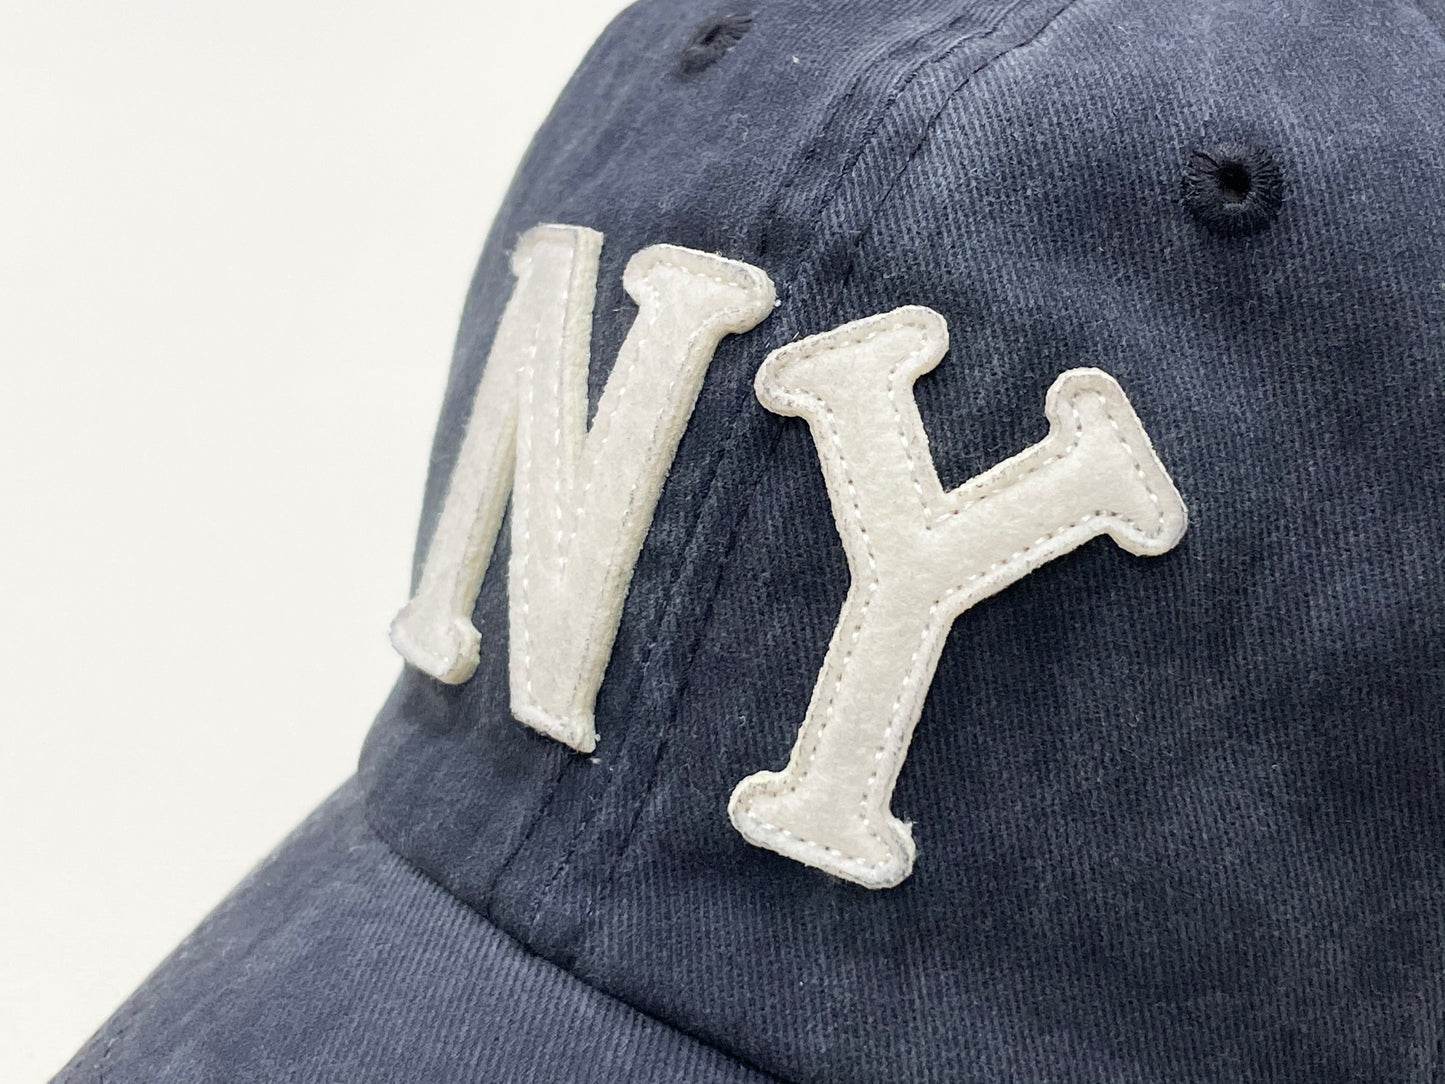 American Needle Archive Pigment Washed Cap - New York Black Yankees